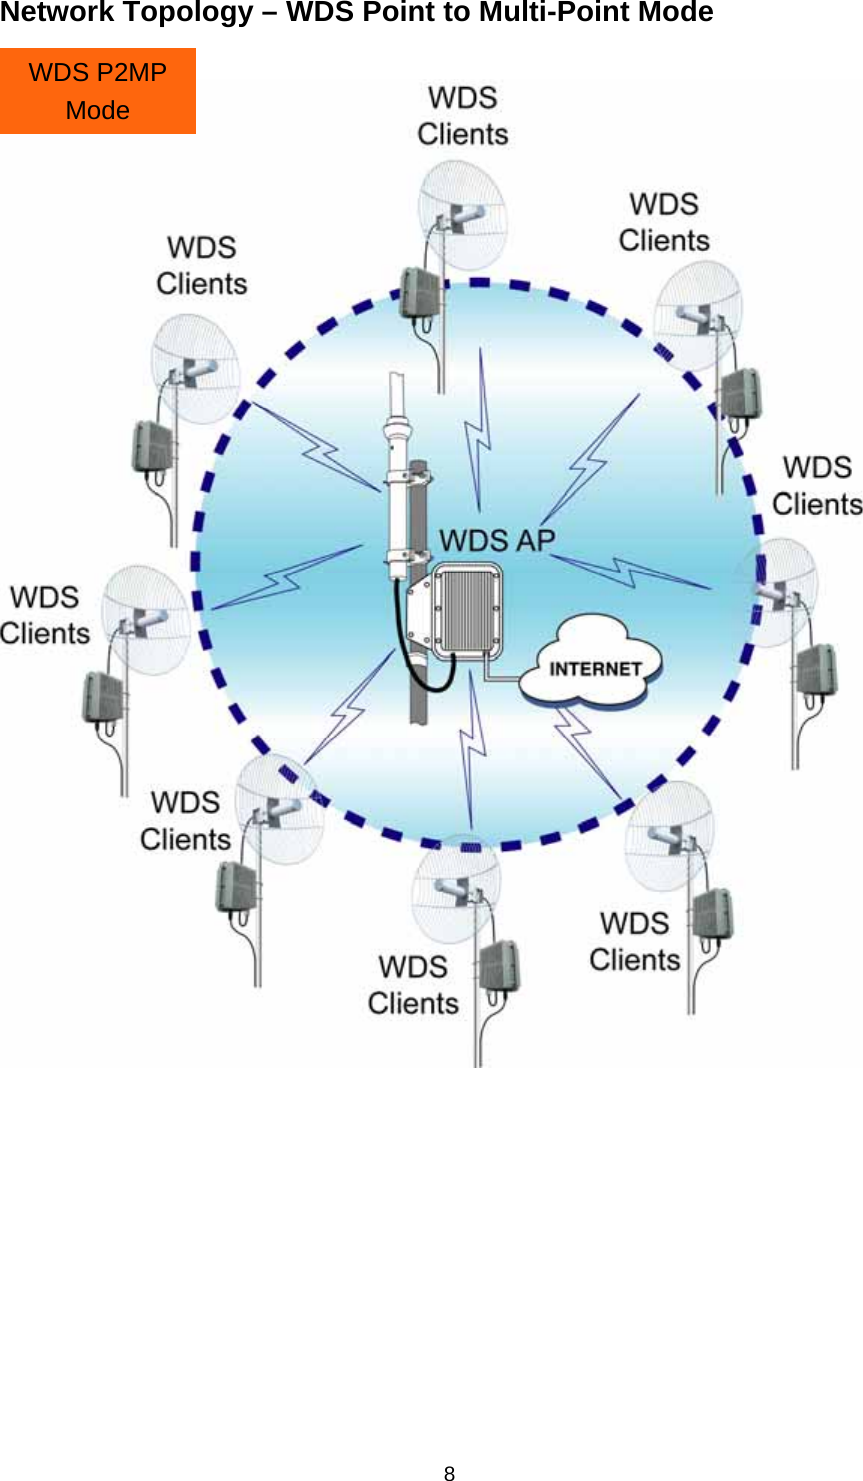 Network Topology – WDS Point to Multi-Point Mode   WDS P2MP Mode   8